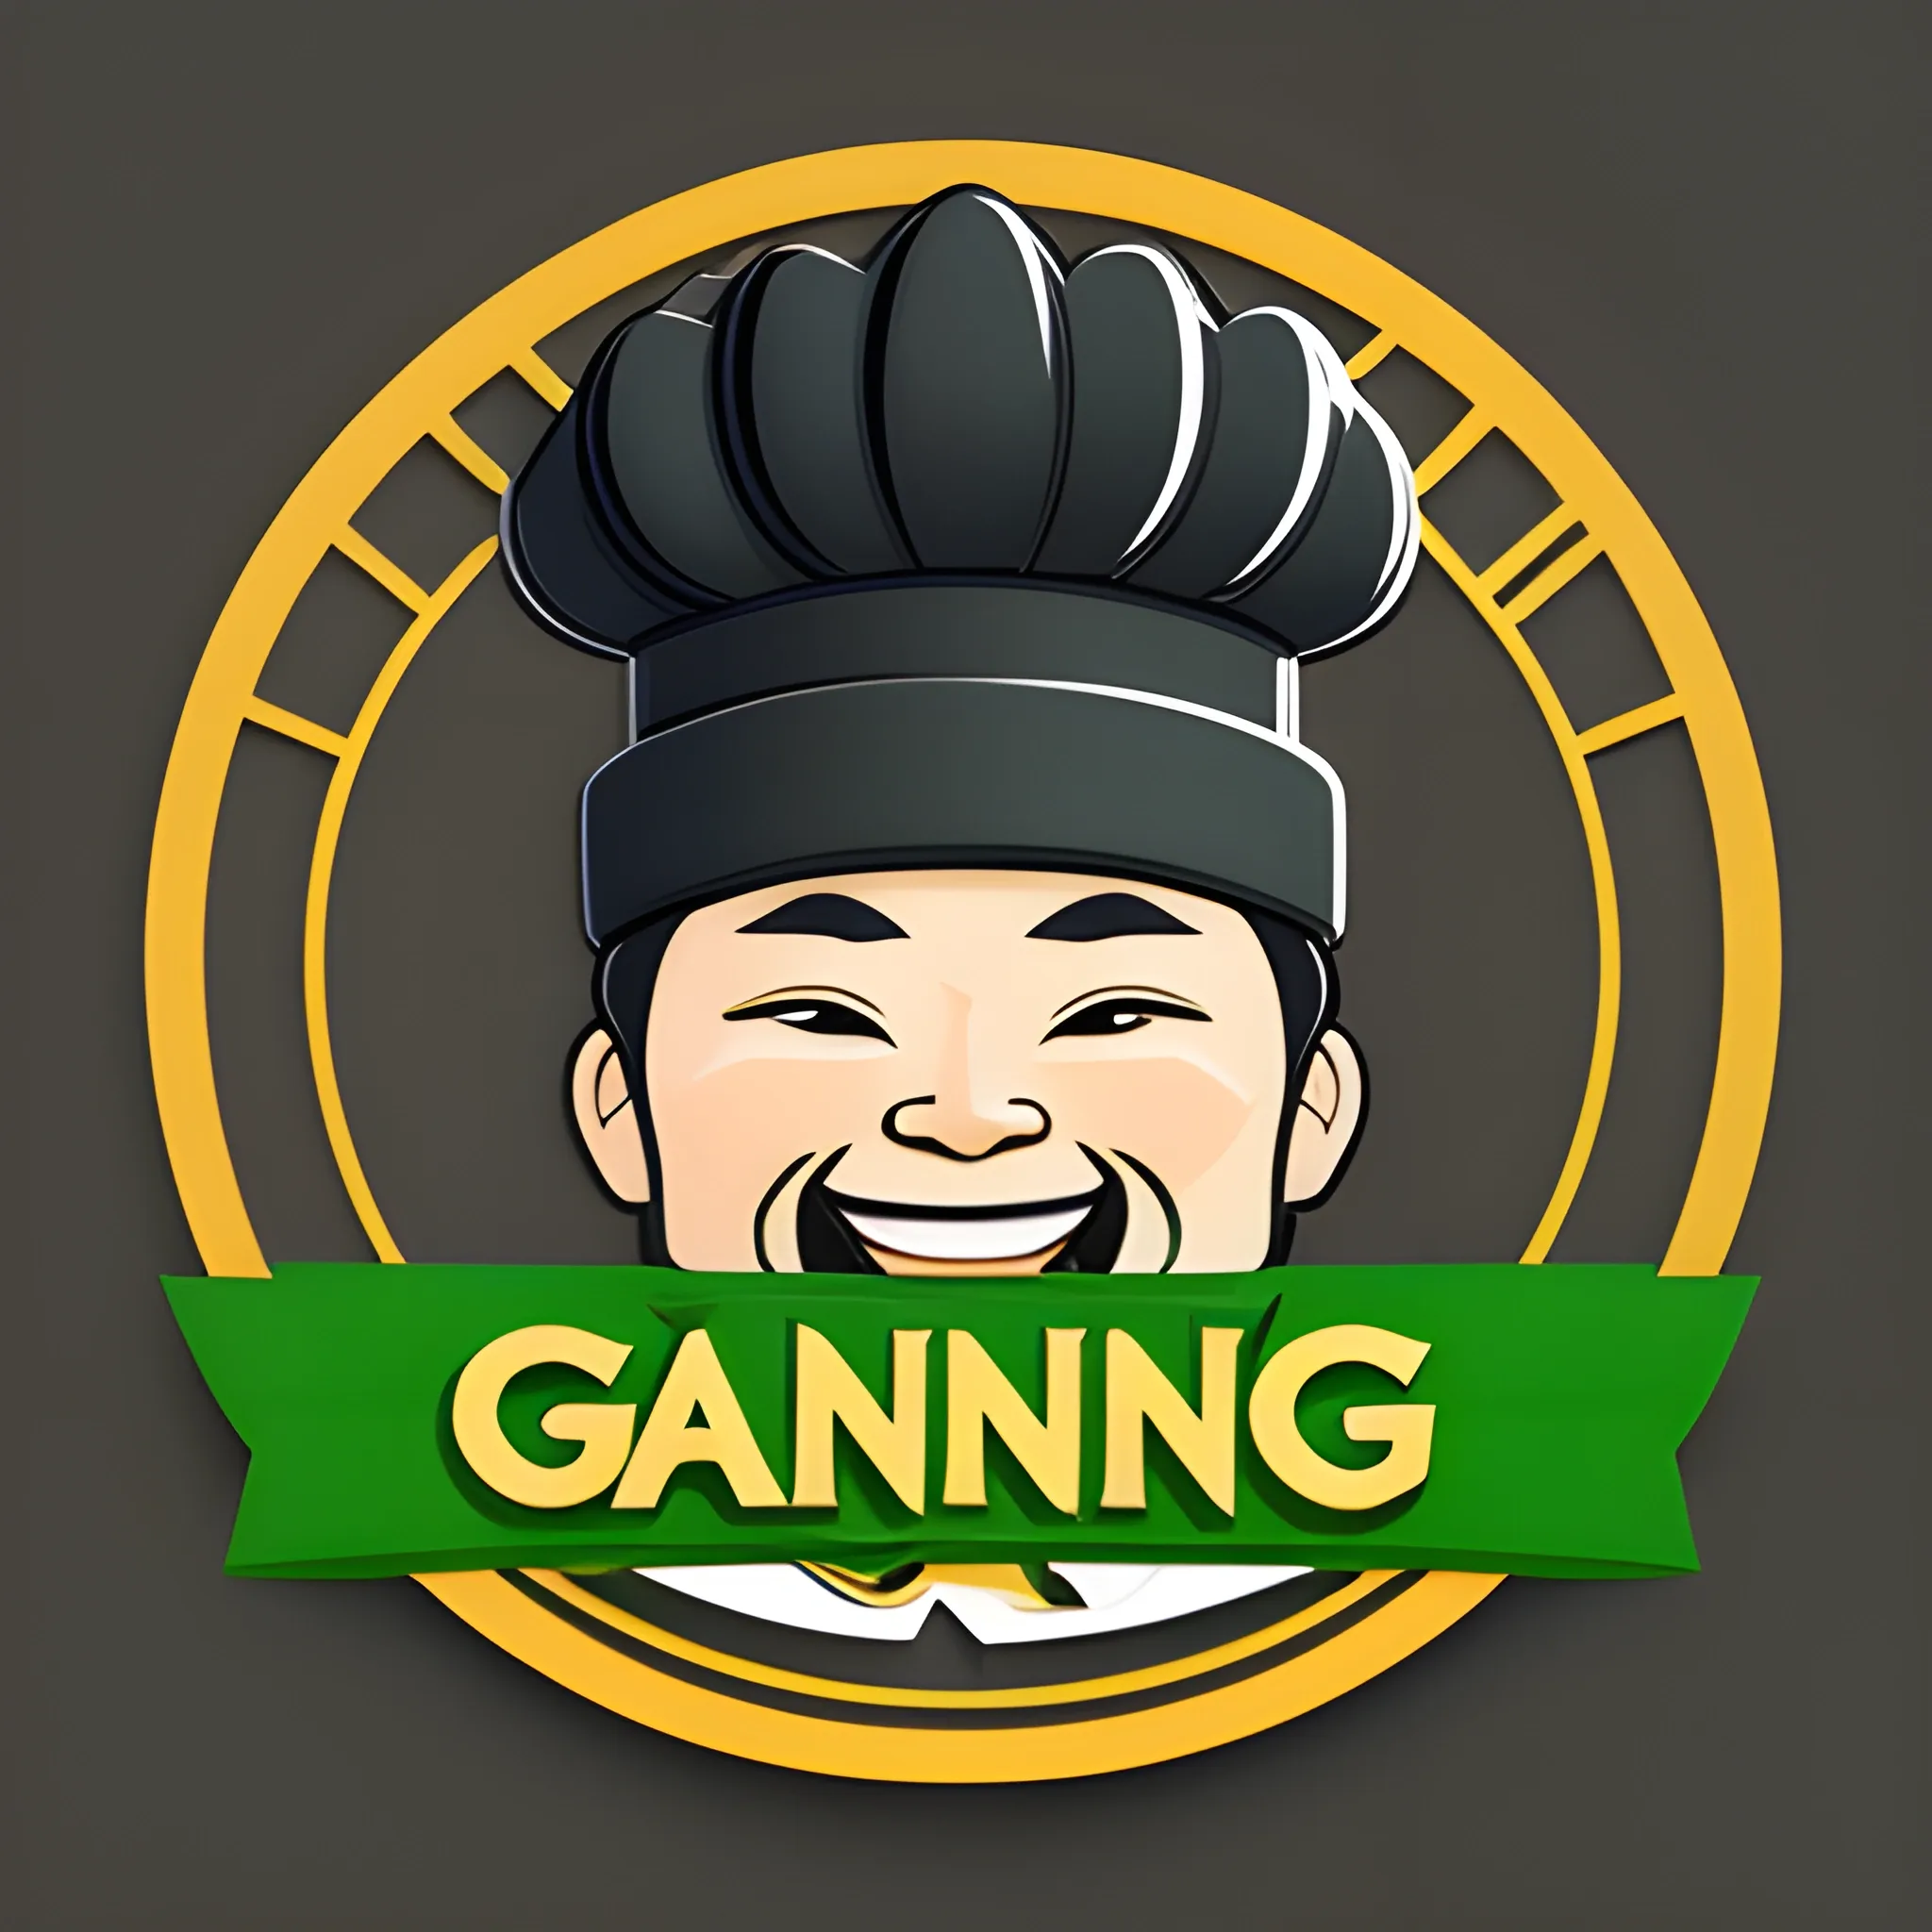 Create a unique and creative logo design for Fong’s Garden. Male chef iconic, wear chef hat, banner text is Fong's Garden place under the logo of head, Black and brown hair, smaile face but no see the teeth. more chinese style overall style. add some food dished around the logo, 3D, Cartoon, Cartoon